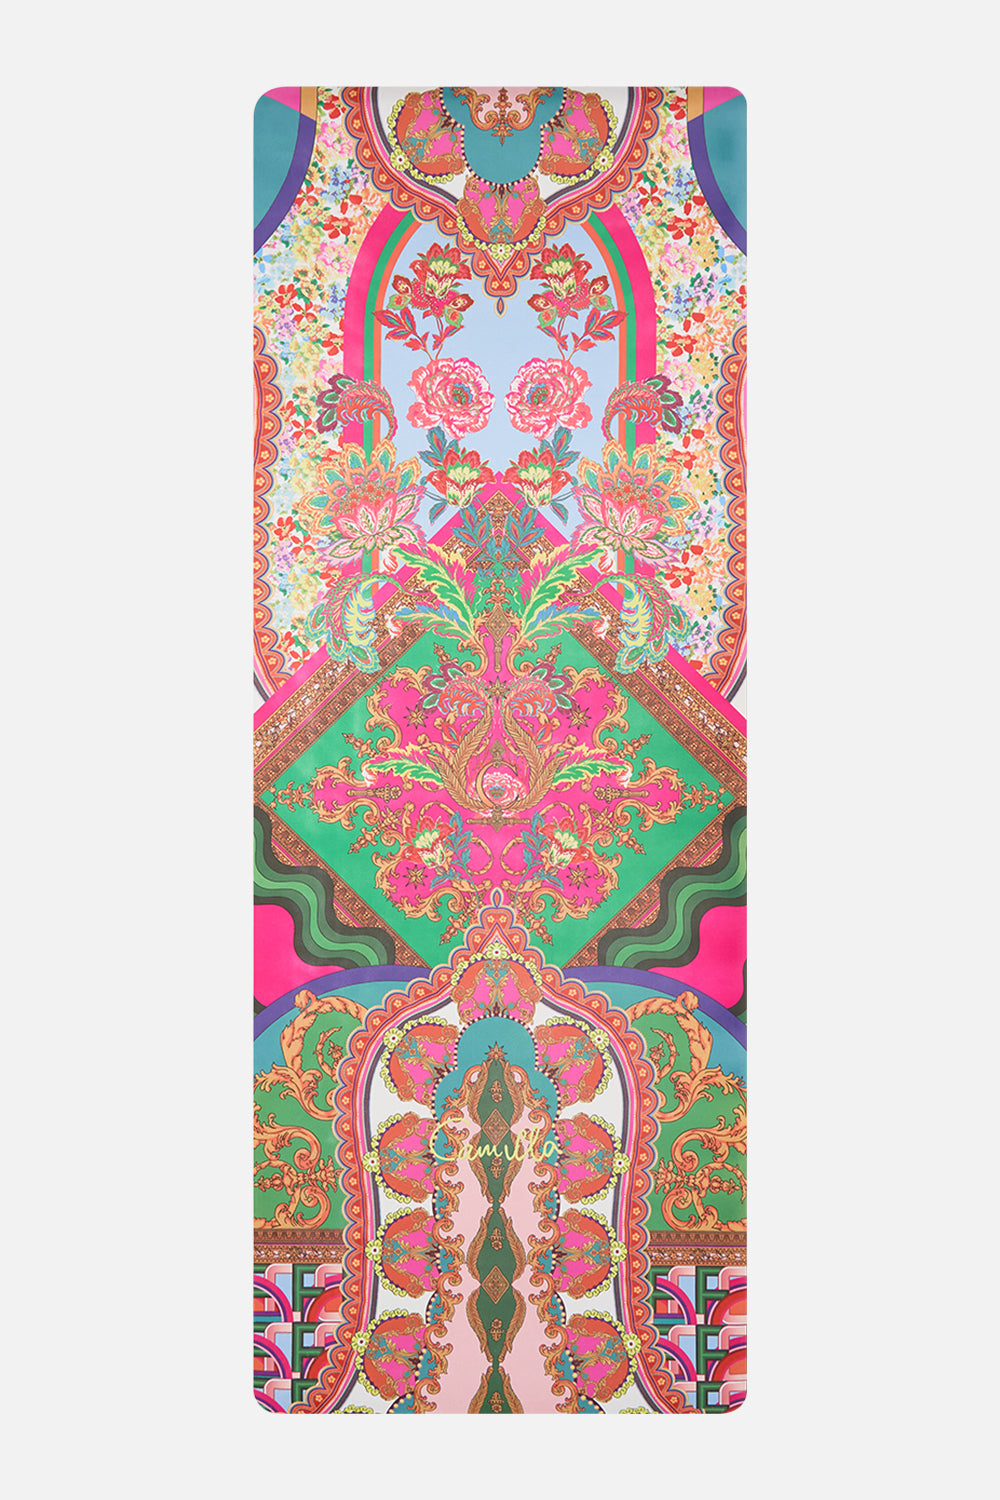 Product view of CAMILLA yoga mat in Ciao Bella print